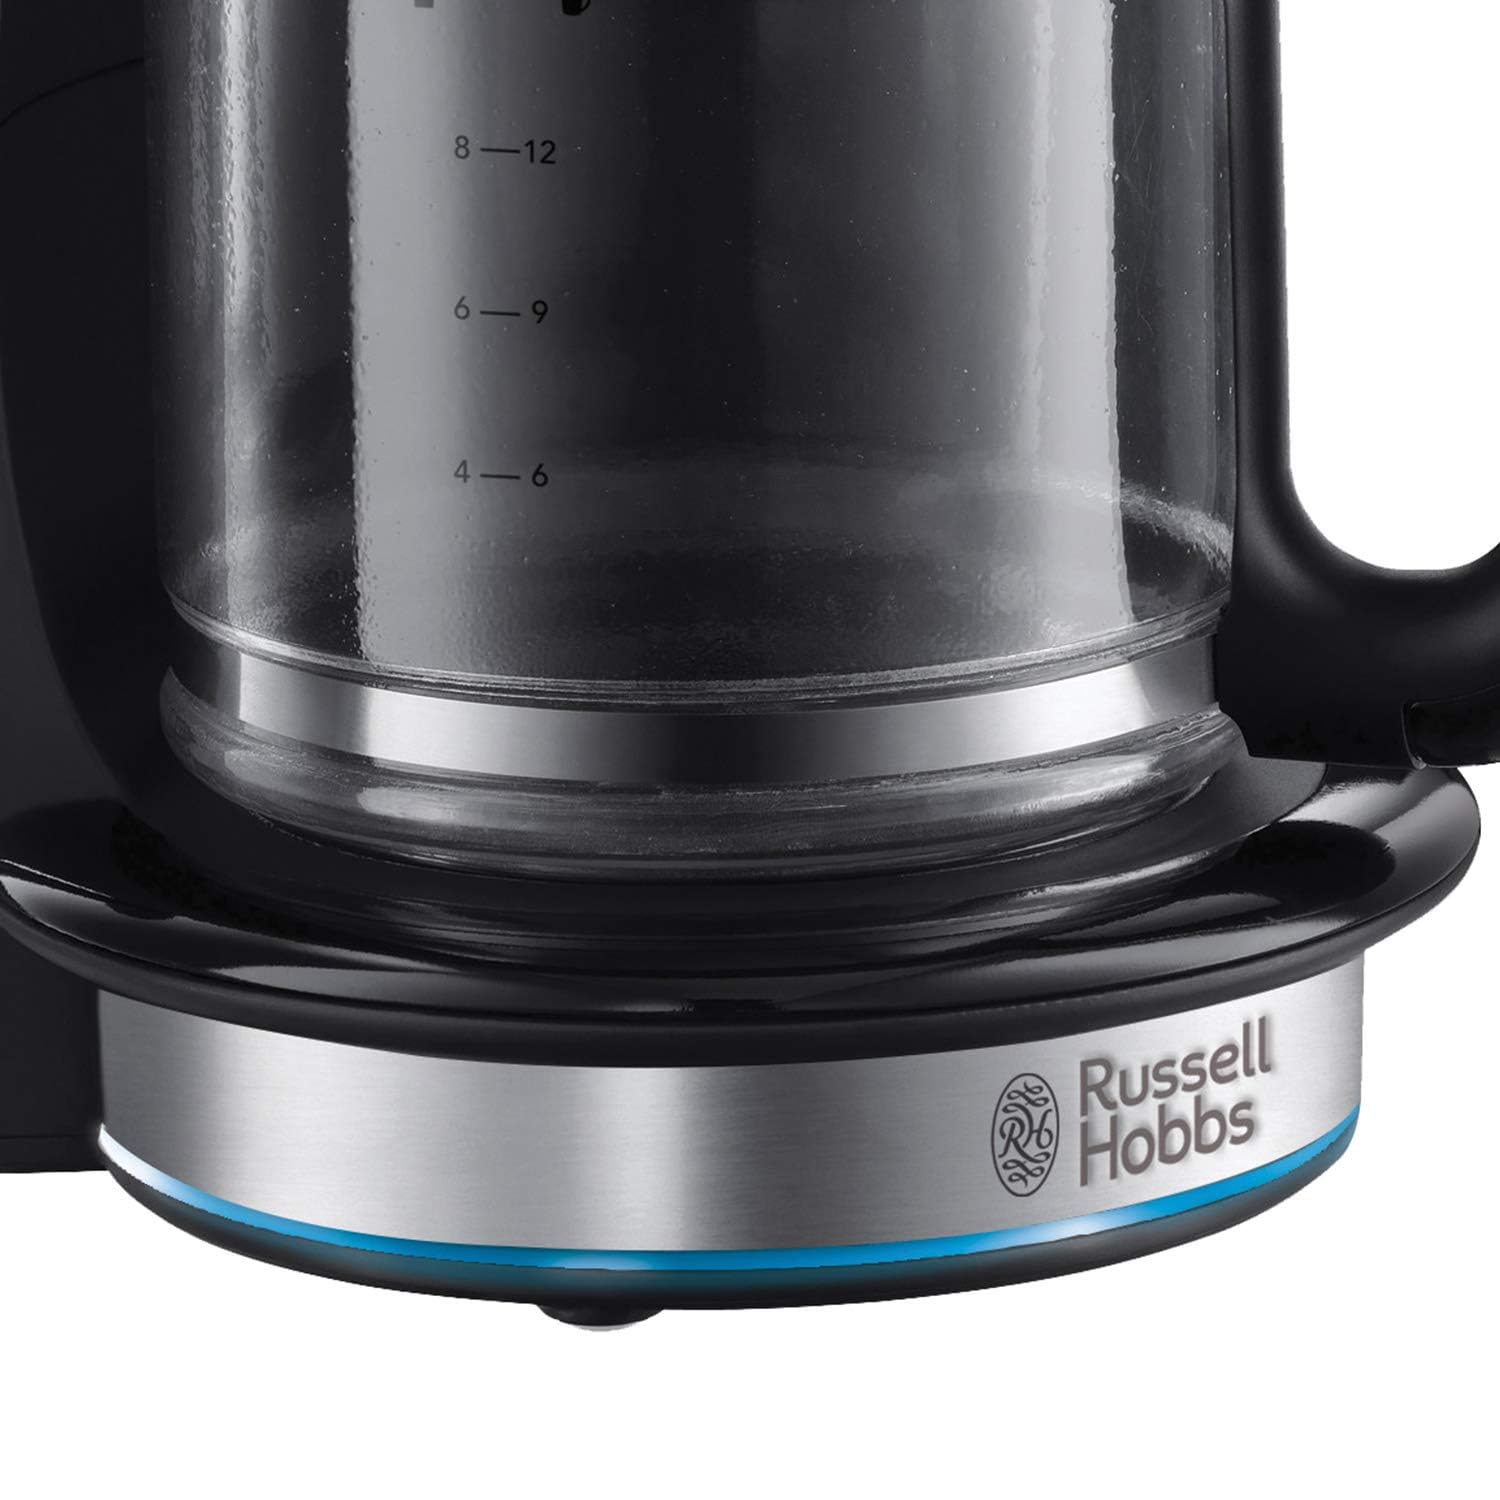 Russell Hobbs Buckingham Filter Coffee Maker, 1000Watts, 1.25 Litre, 24-hour programmable timer, 50% faster, 2-4 cup option, auto clean feature, 20680 - Black, 1 year warranty